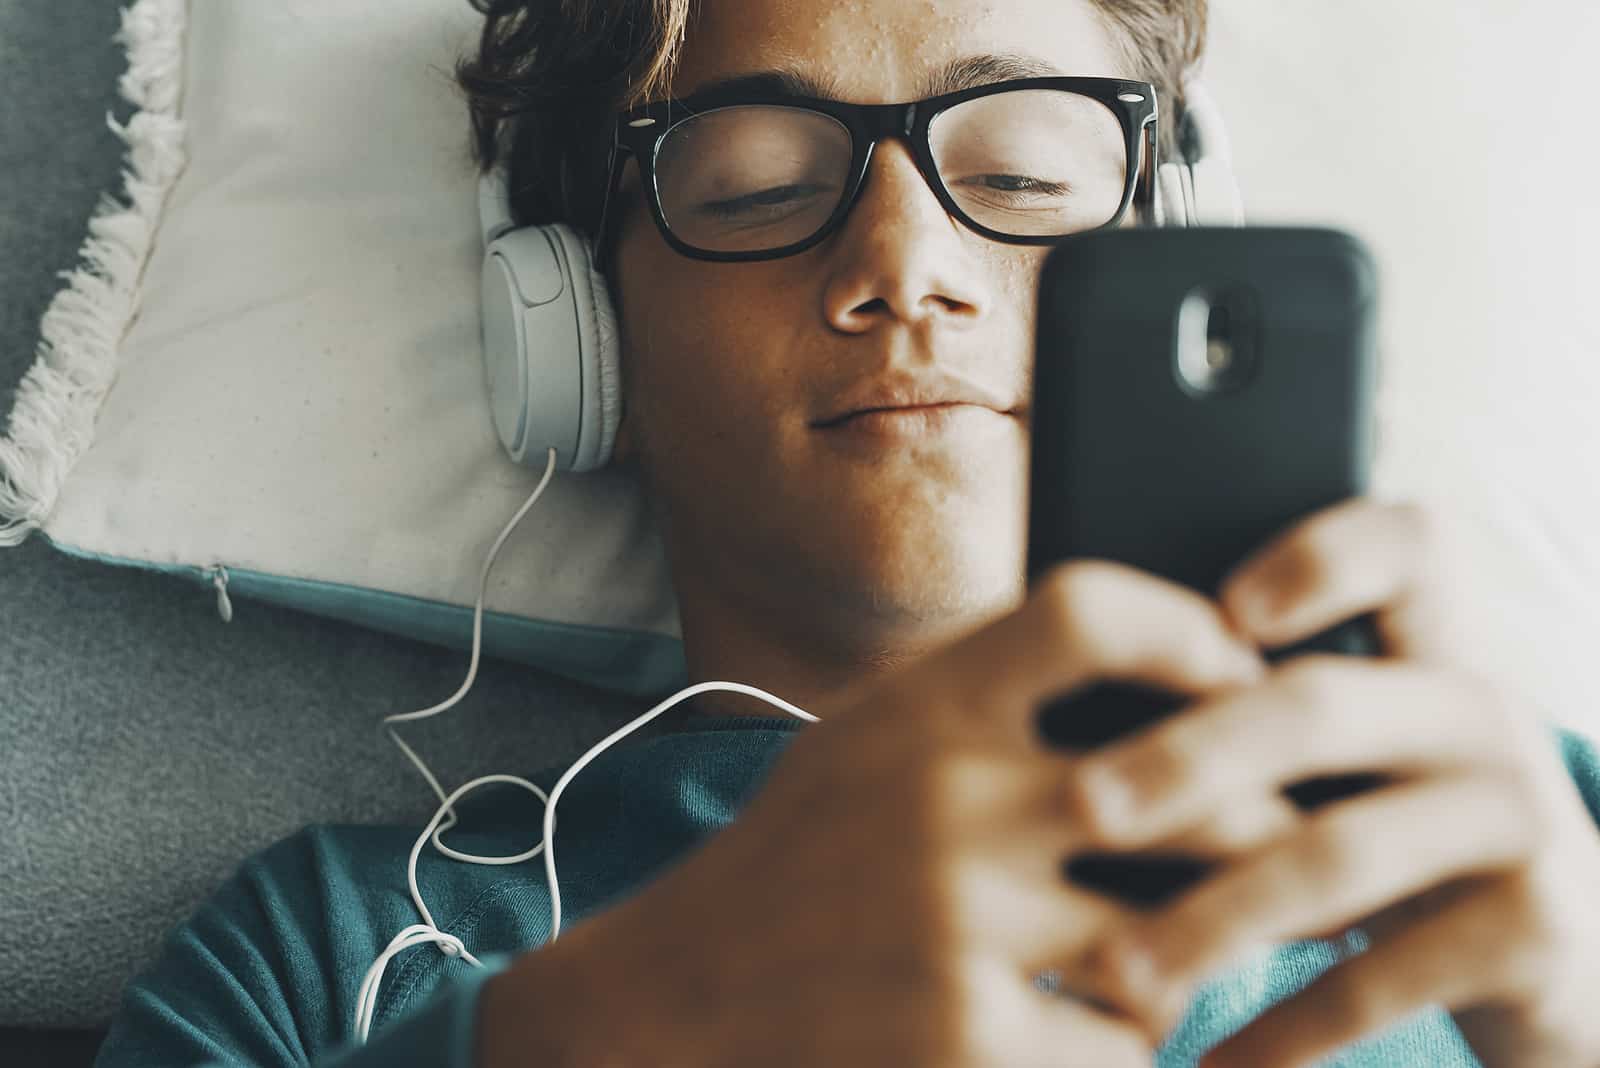 Screens aren’t going anywhere, but parents don’t have a clear way to manage screen time for teens in a way that feels healthy, balanced, and sustainable. Finding the right balance of screen time for your family and teen is possible, and our team at Pure Life Adventure has some great, practical tips to get you started